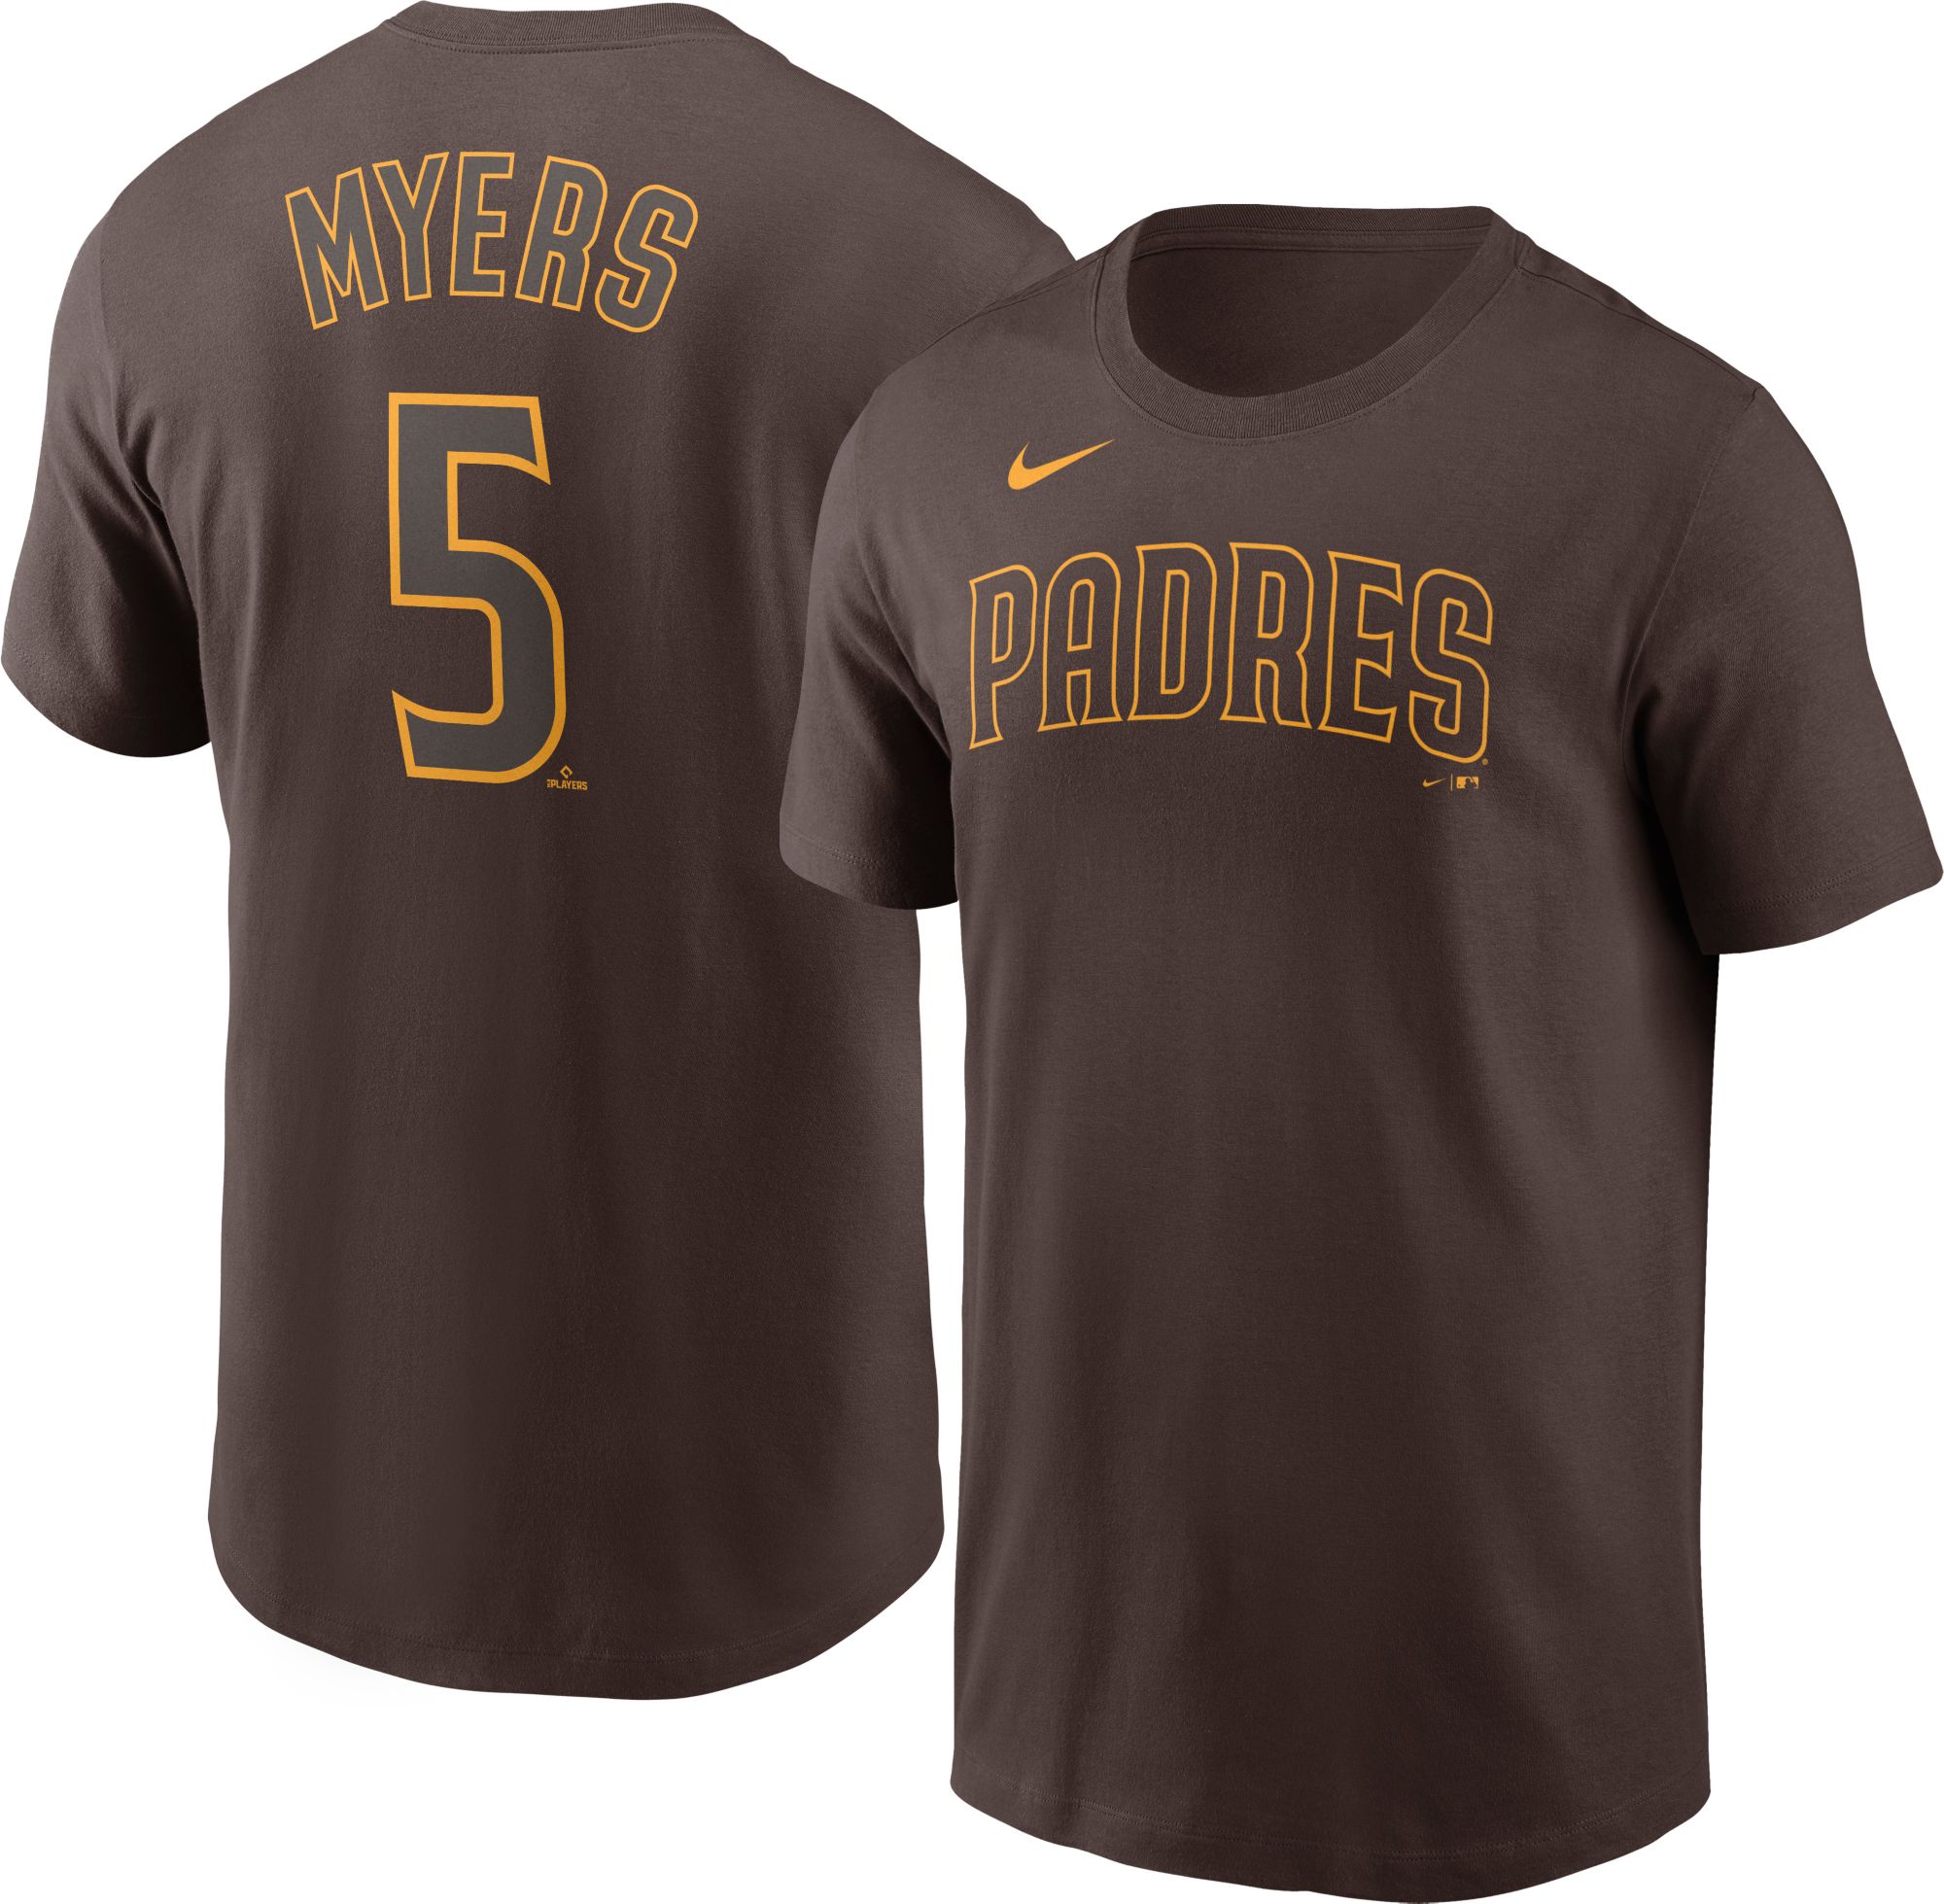 Youth Wil Myers San Diego Padres Replica White /Brown Home Jersey